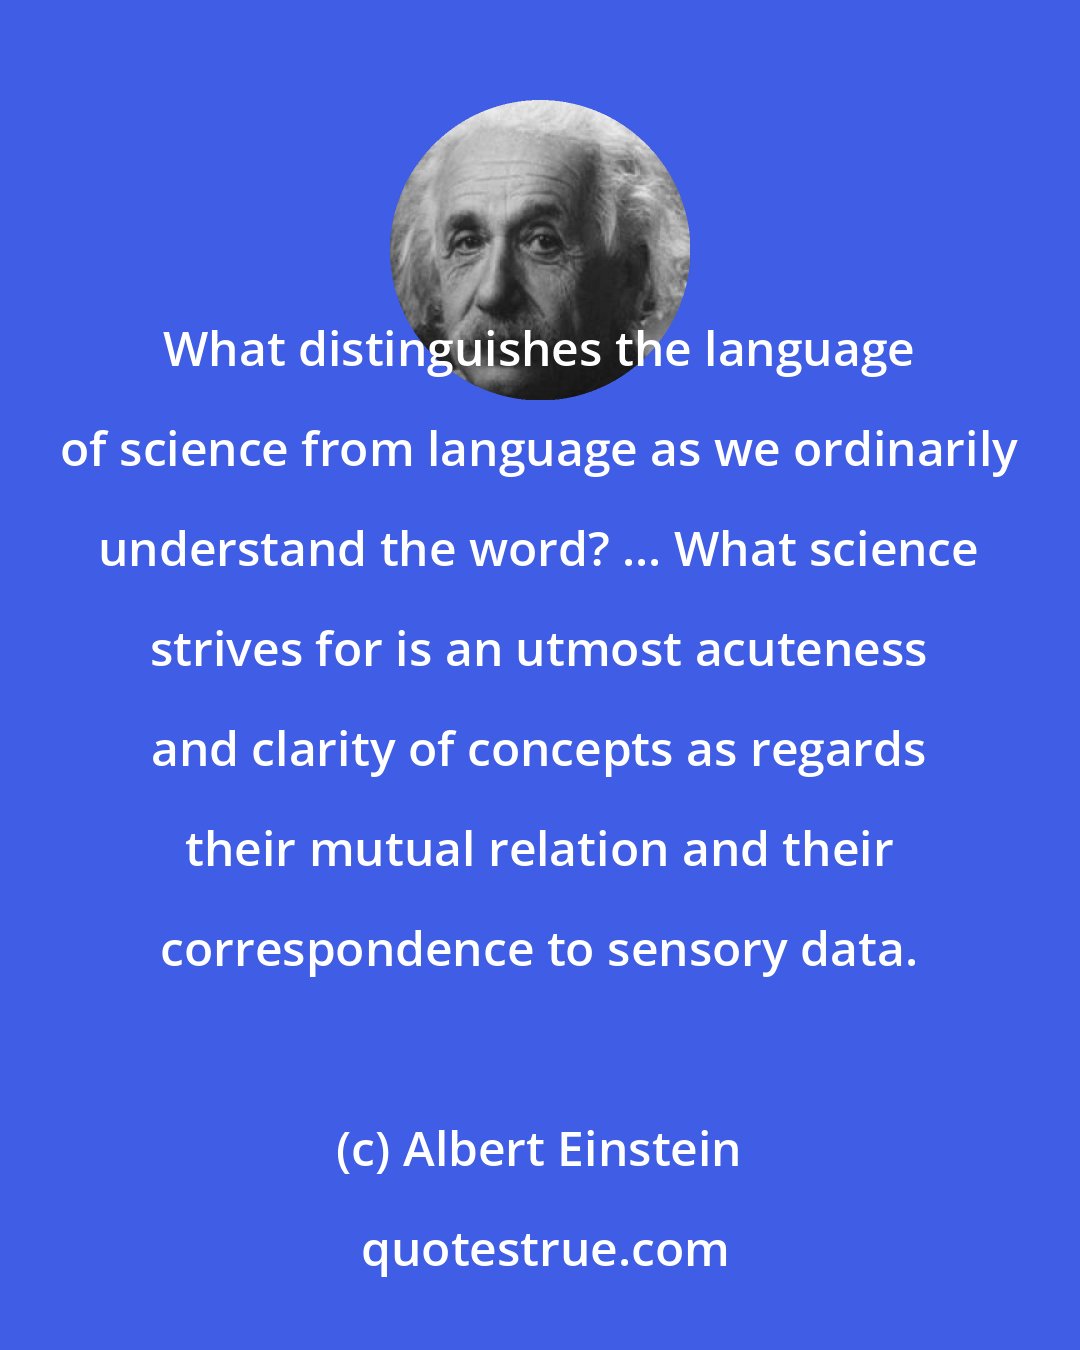 Albert Einstein: What distinguishes the language of science from language as we ordinarily understand the word? ... What science strives for is an utmost acuteness and clarity of concepts as regards their mutual relation and their correspondence to sensory data.